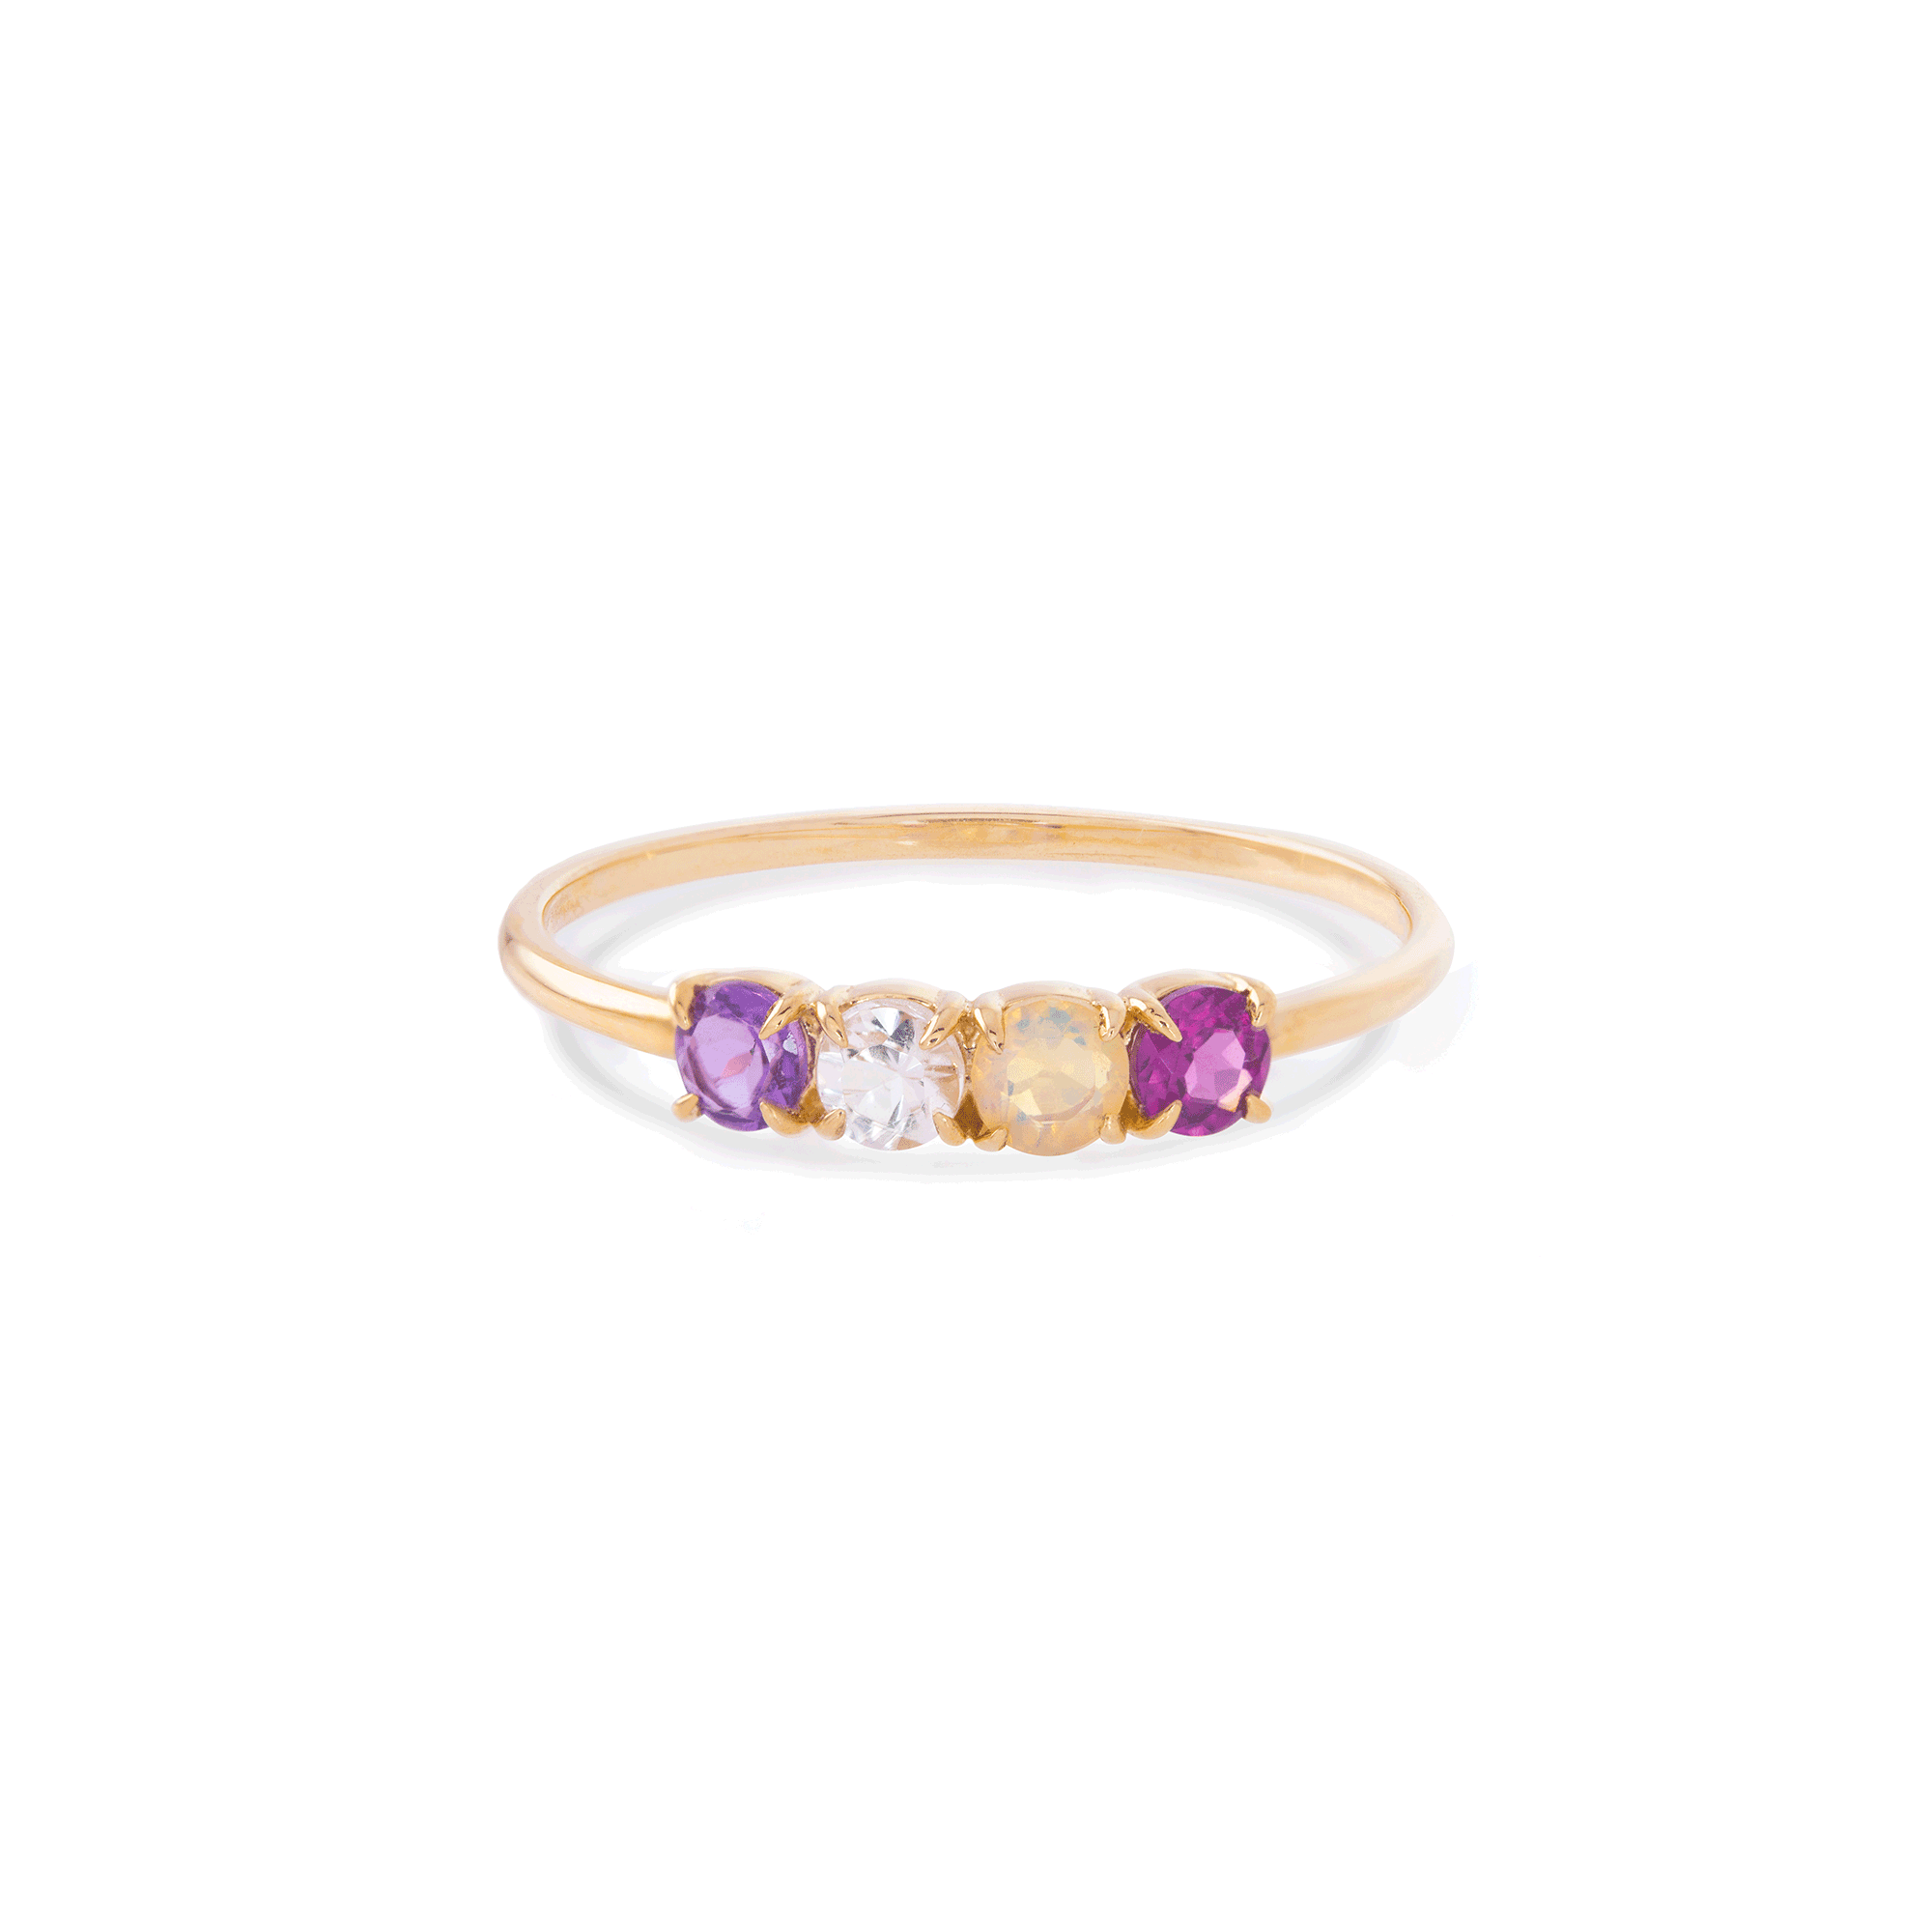 AMOR Ring – STONE AND STRAND